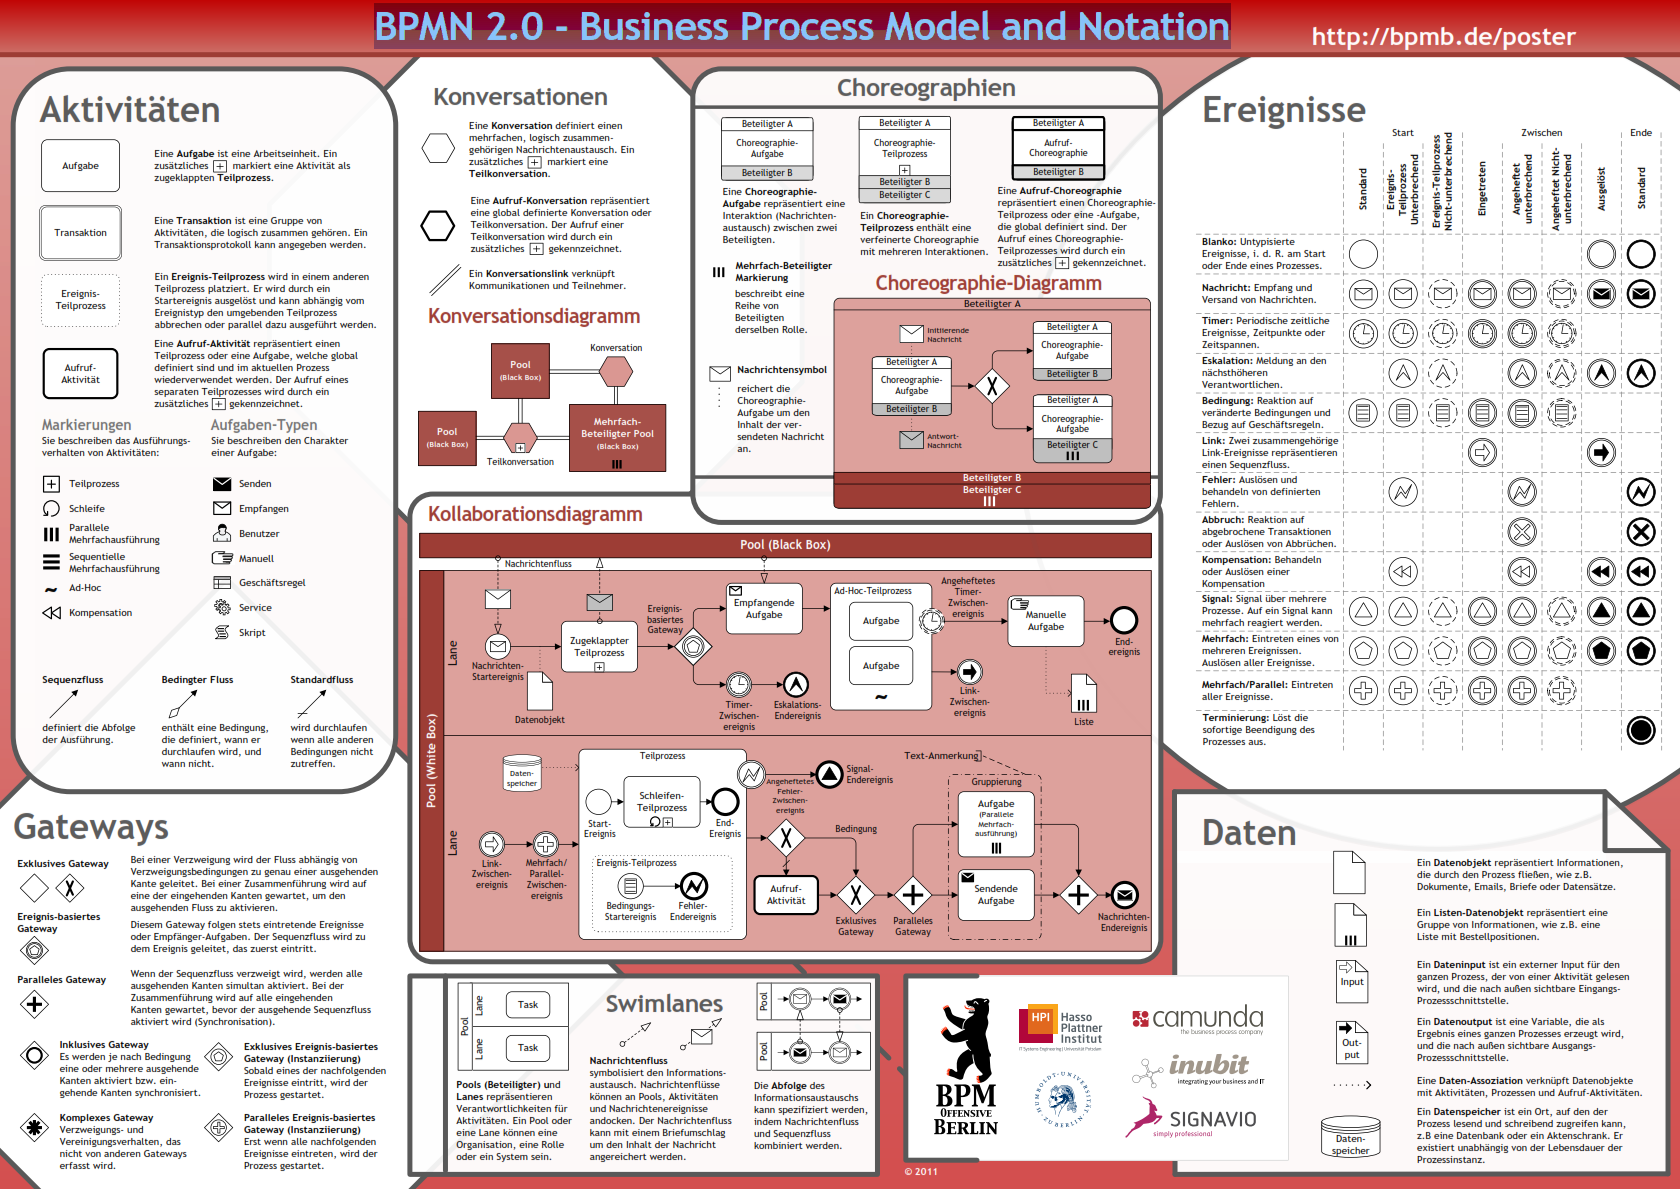 BPMN 2.0 - Business Process Model and Notation (Poster)